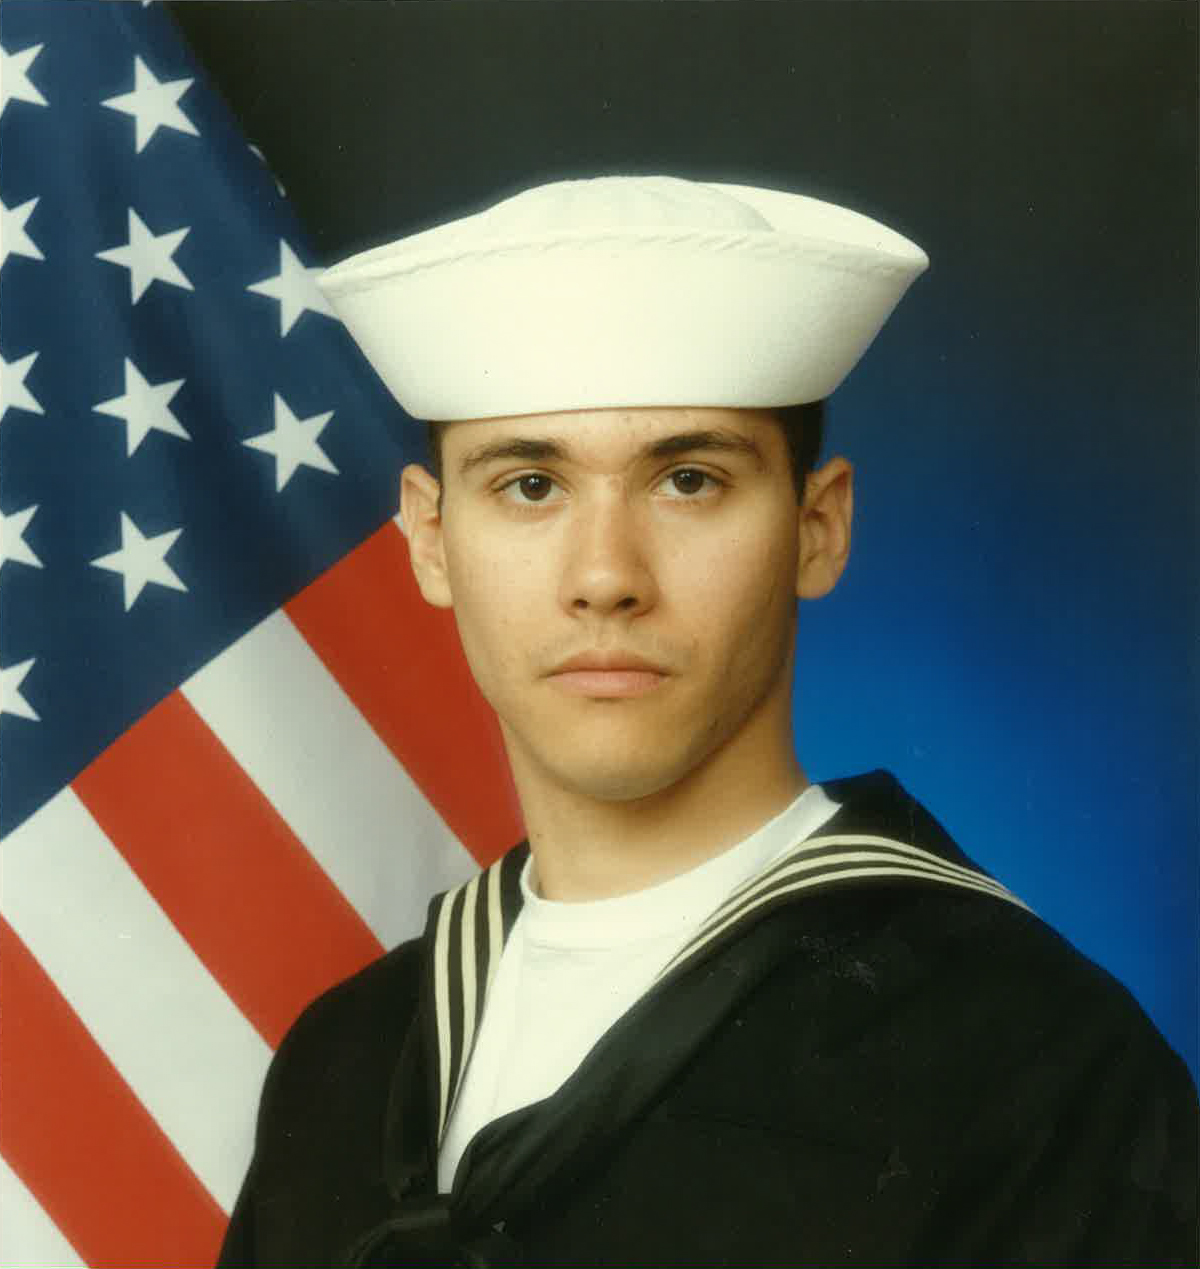 Louis Eguaras trained at the Naval Academy in culinary arts.